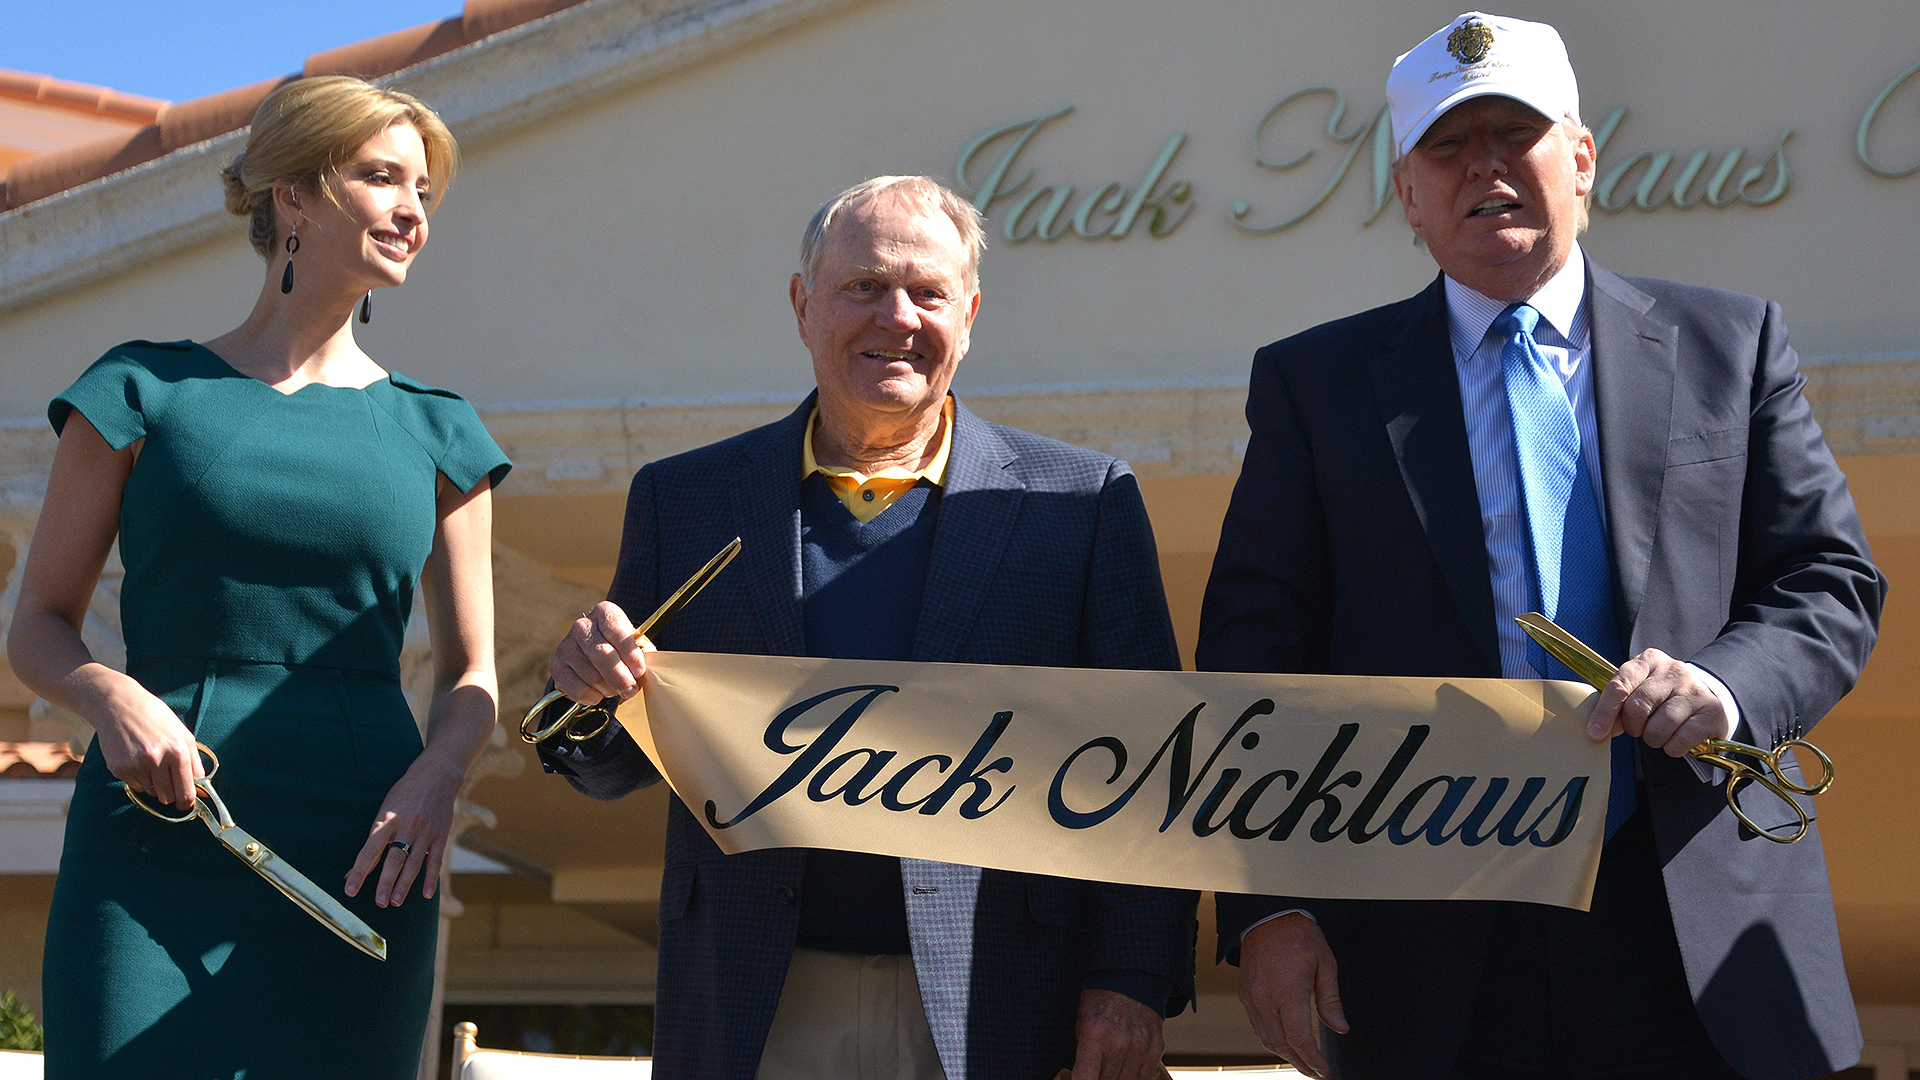 Jack Nicklaus asks people to vote for Donald Trump, warns against ‘socialist America’